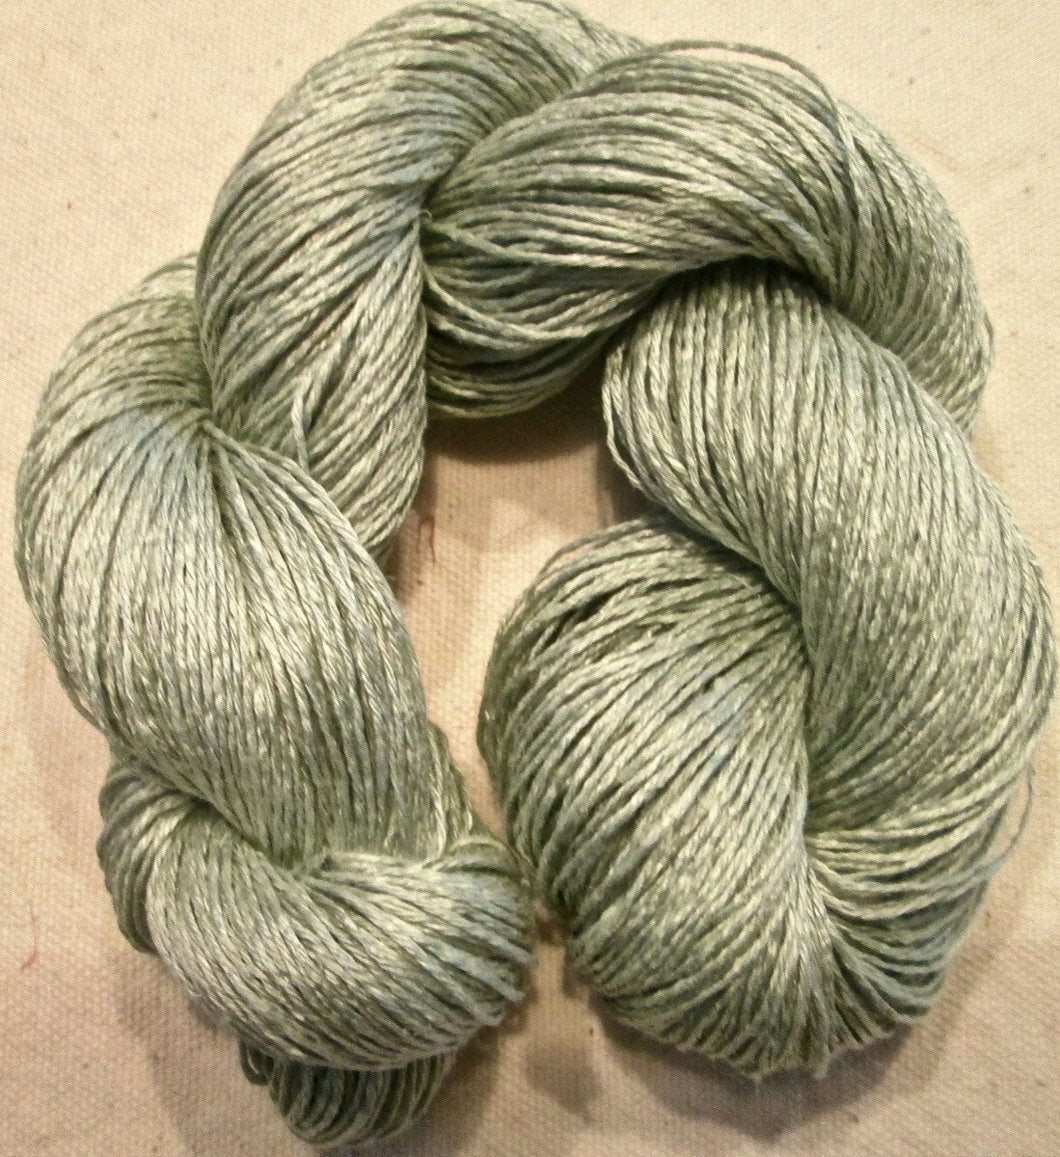 Wet Spun Linen Yarn Soft & Durable Limestone Spinning and Weaving SUPER FAST SHIPPING!